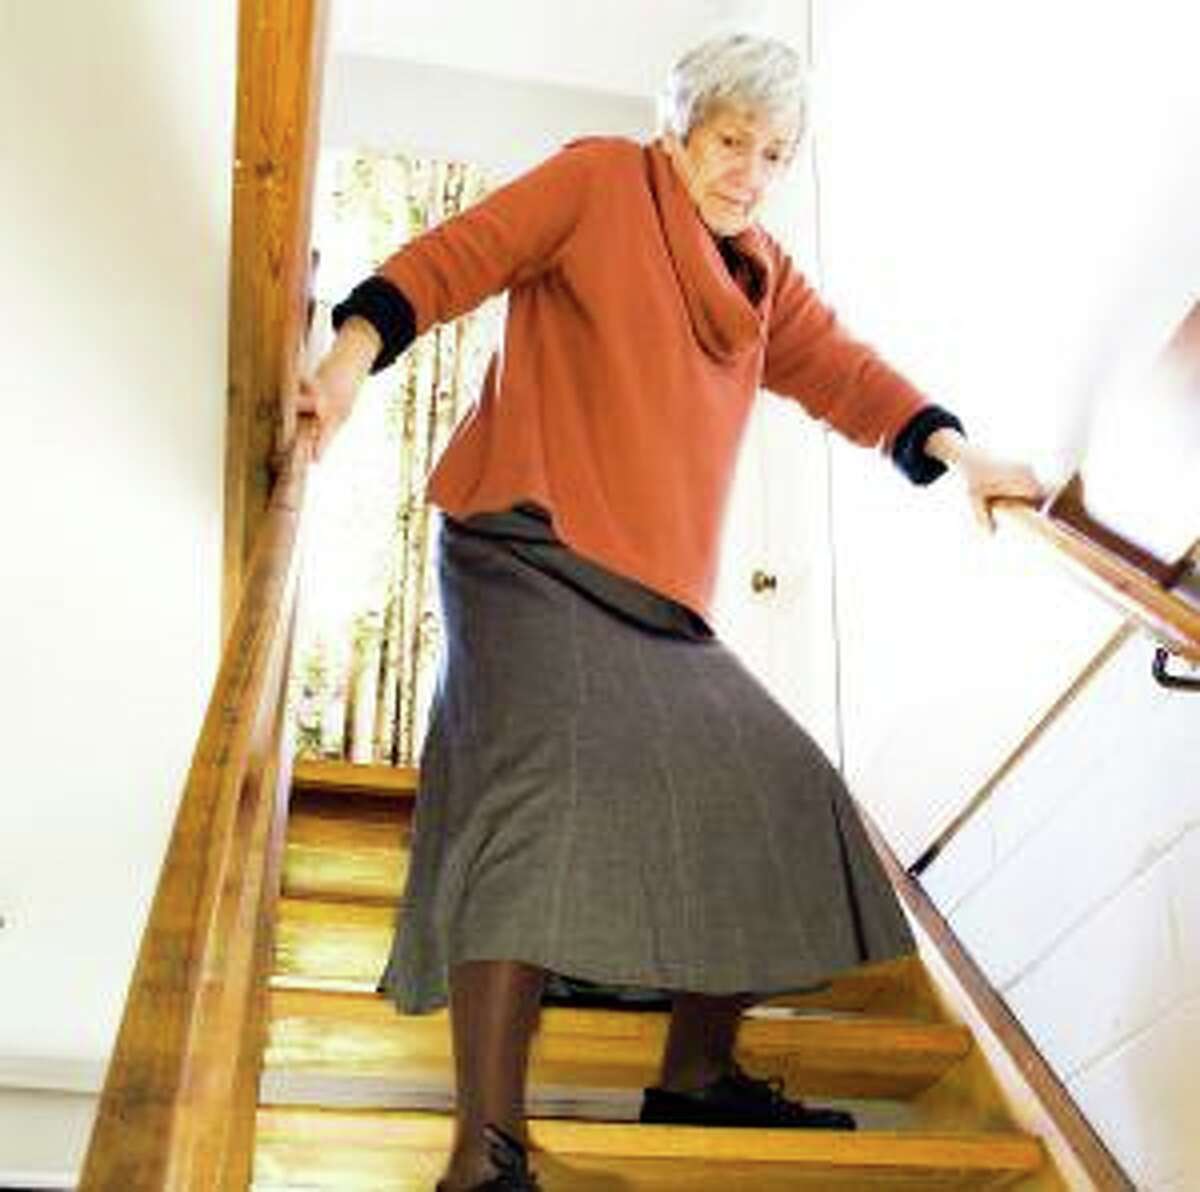 Griffin Health and the Naugatuck Valley Health District will host a free fall prevention event from 4:30-6 p.m. on Tues., Sept. 24 at Griffin Hospital in Derby.